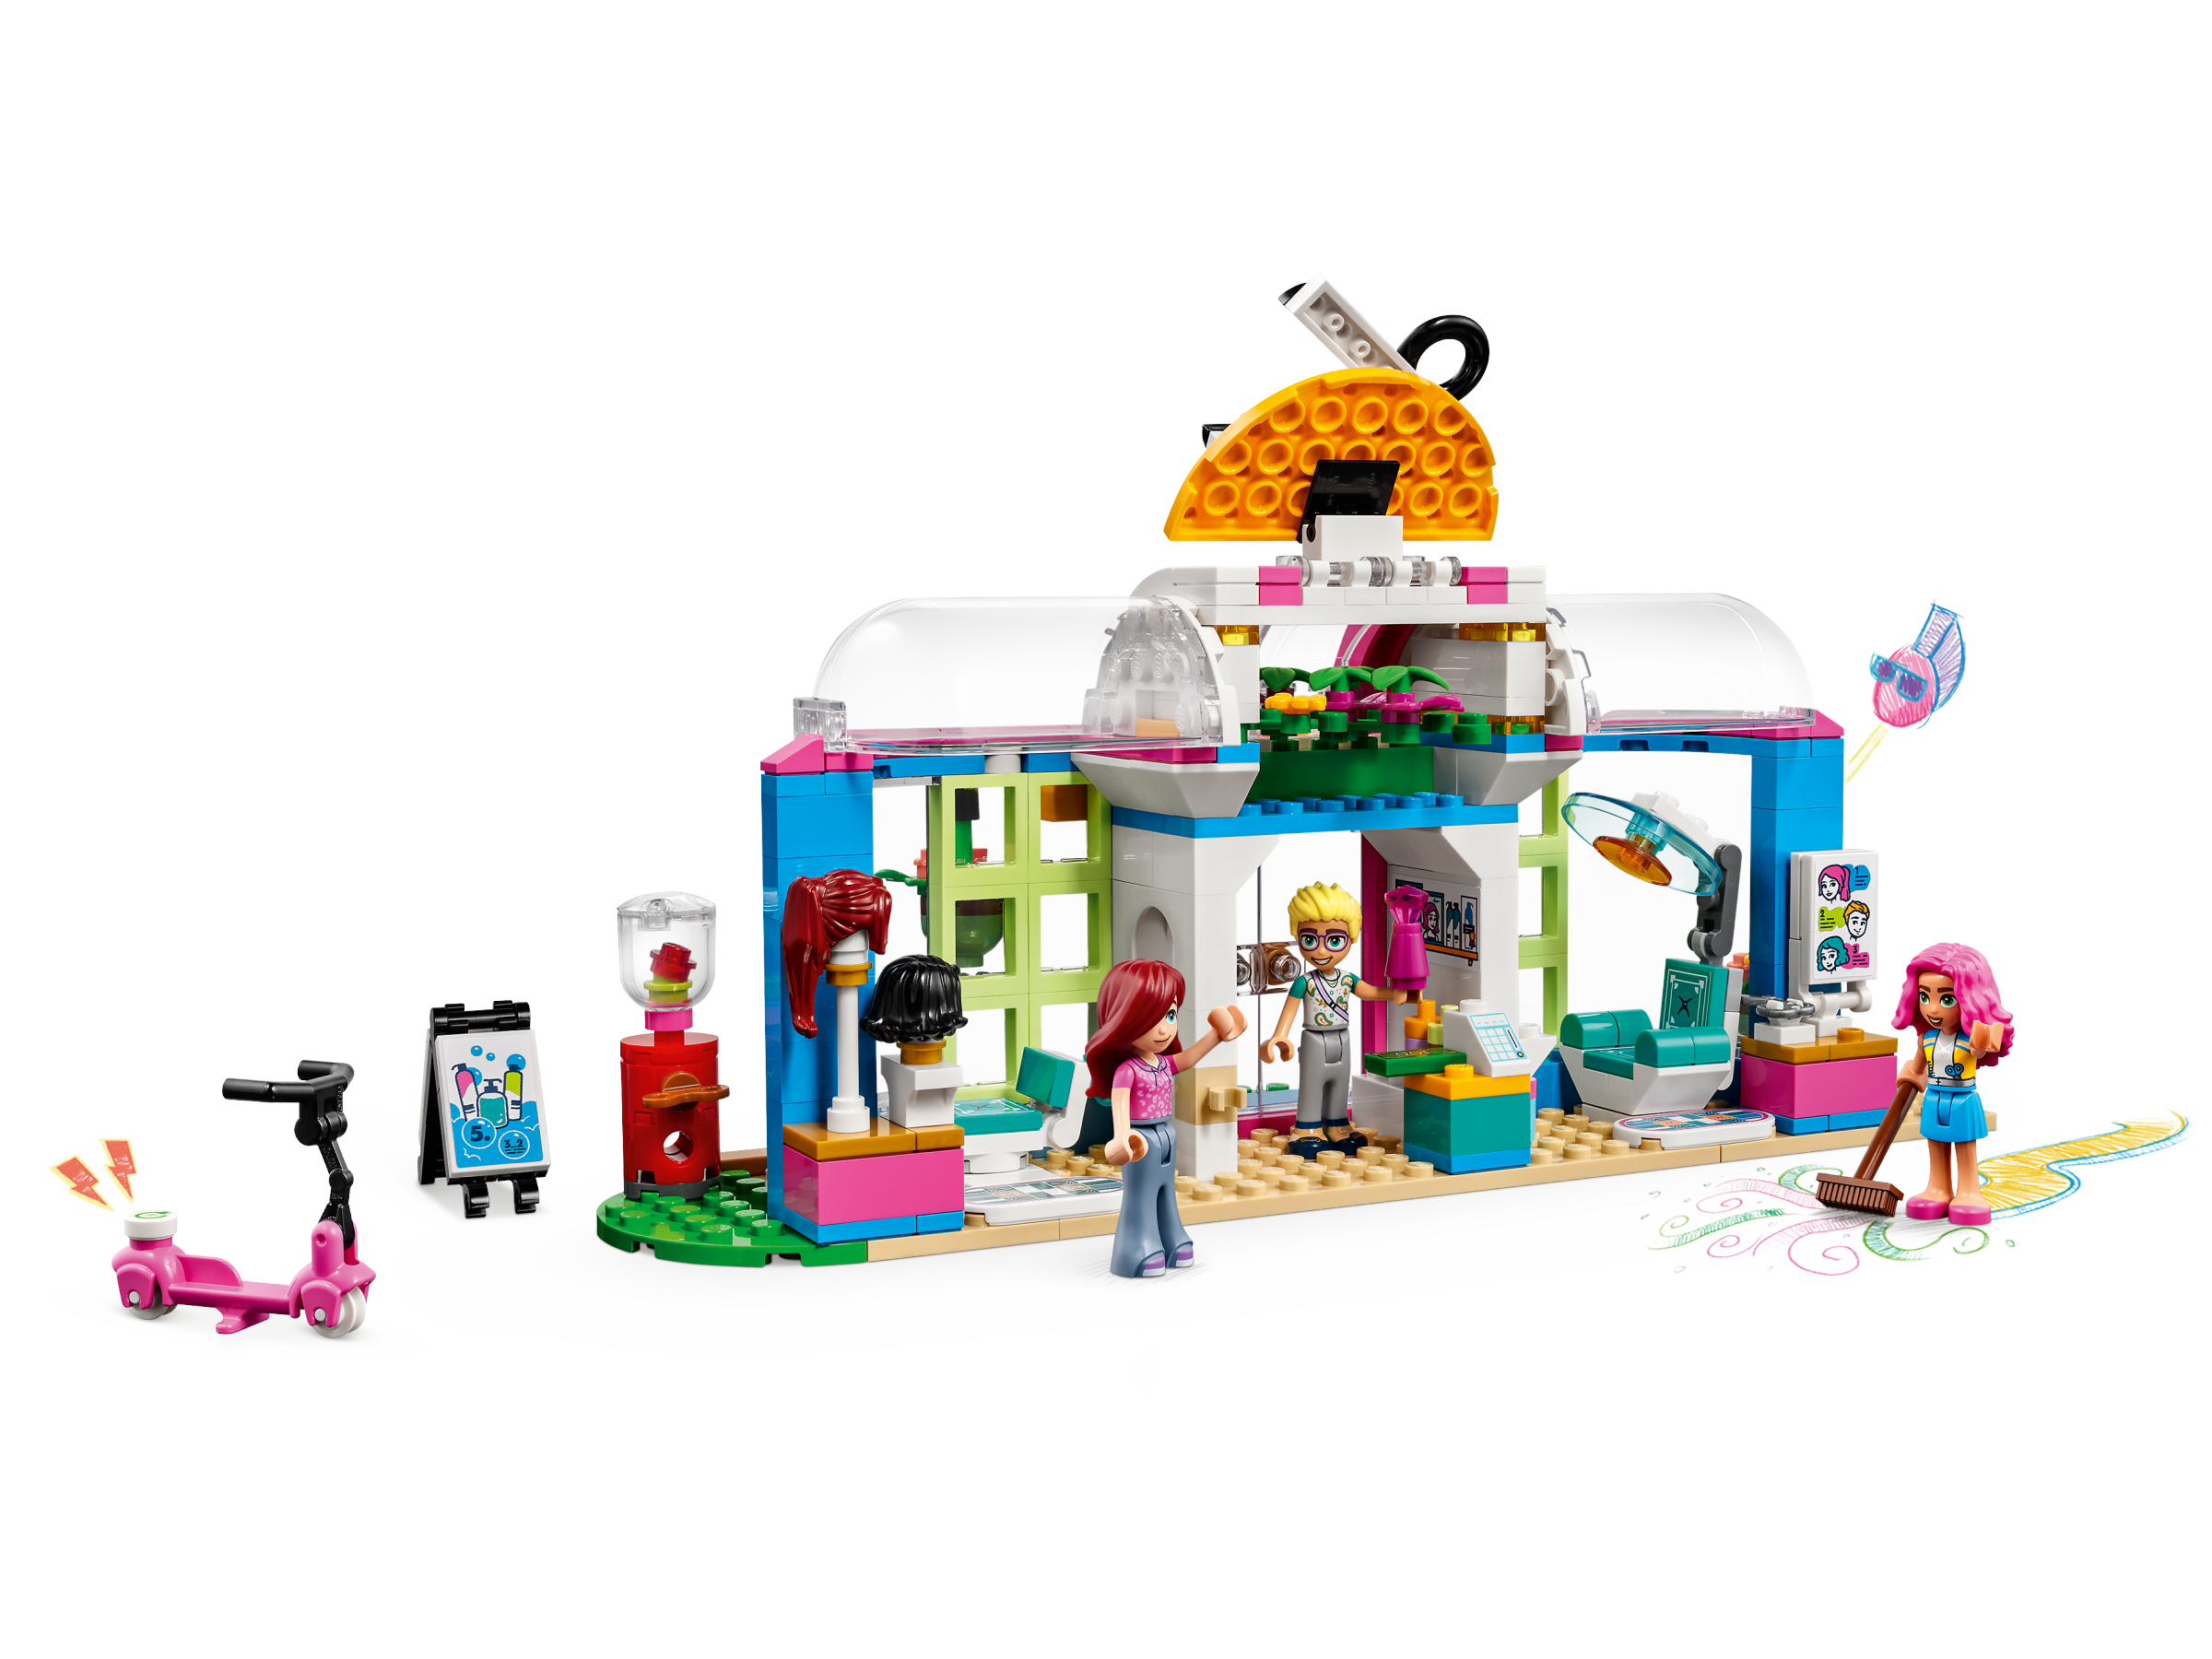 Hair Salon 41743 | Friends the Official Buy online at LEGO® IL Shop 